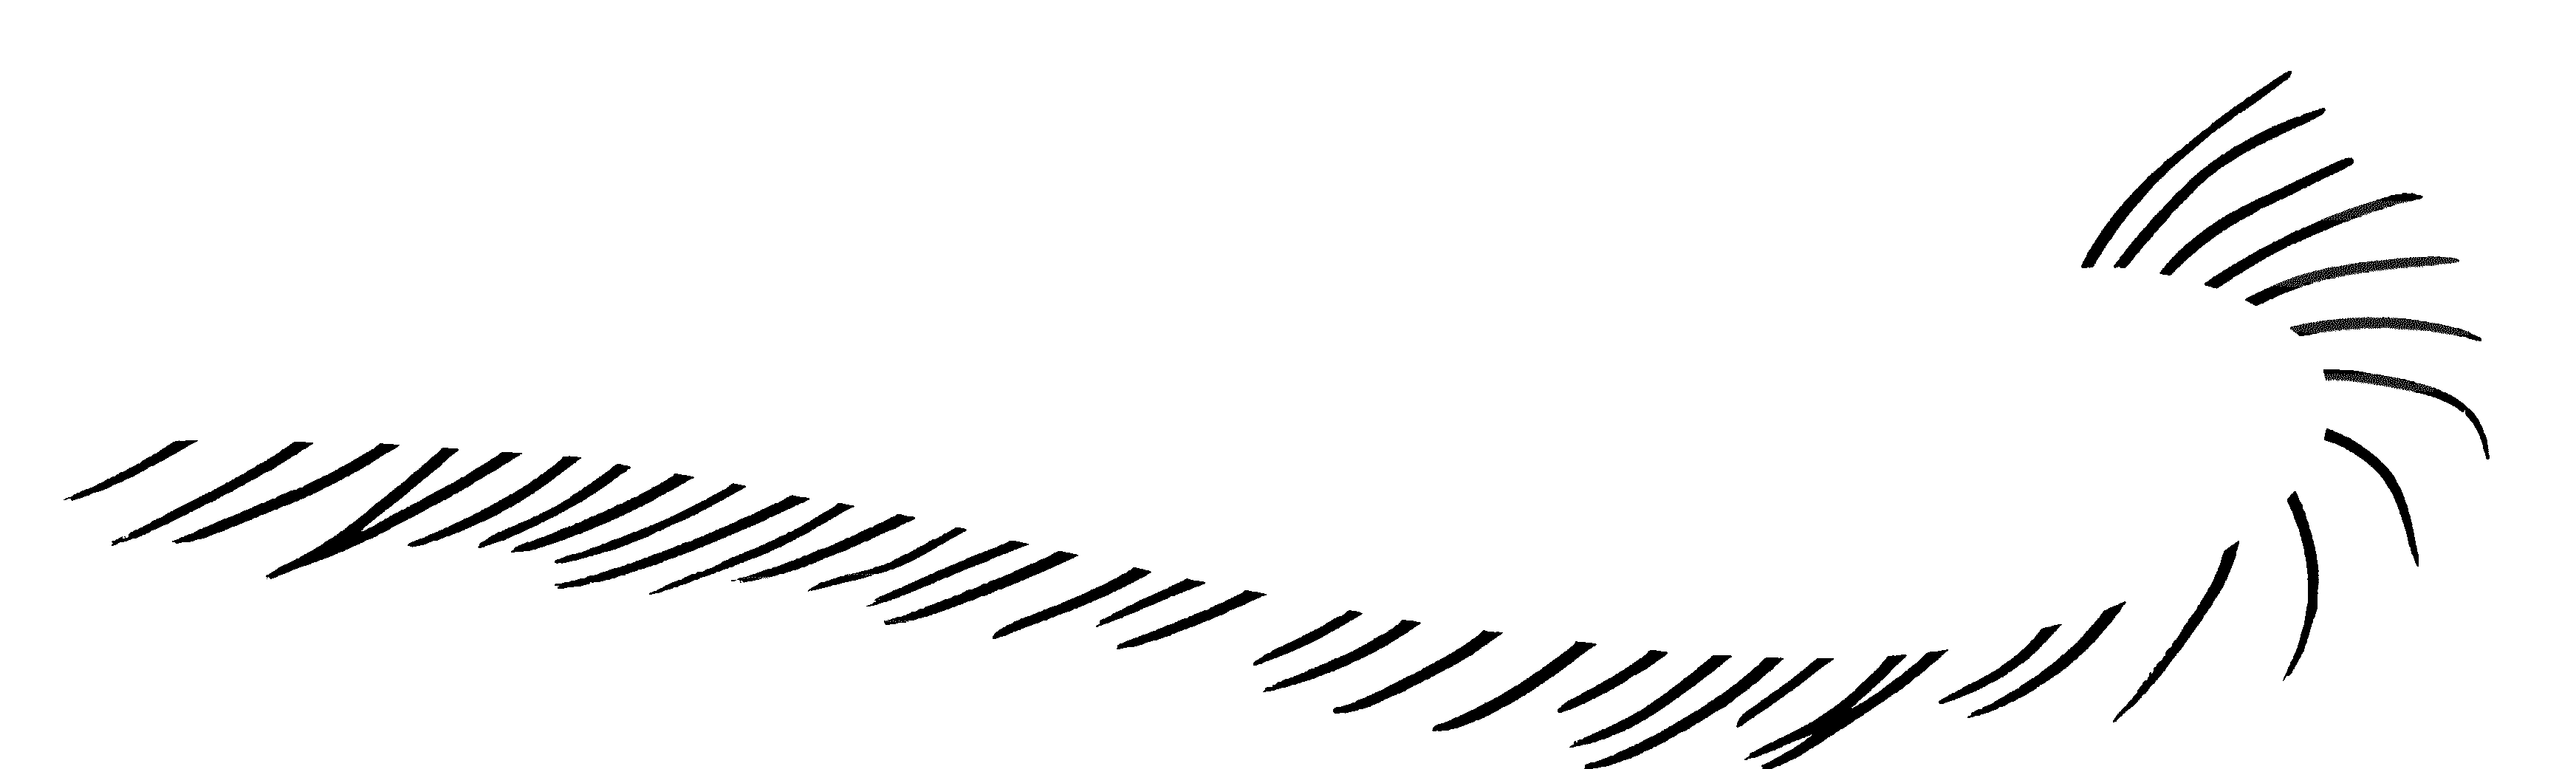 Illusory contour forming at inner edges of black marks